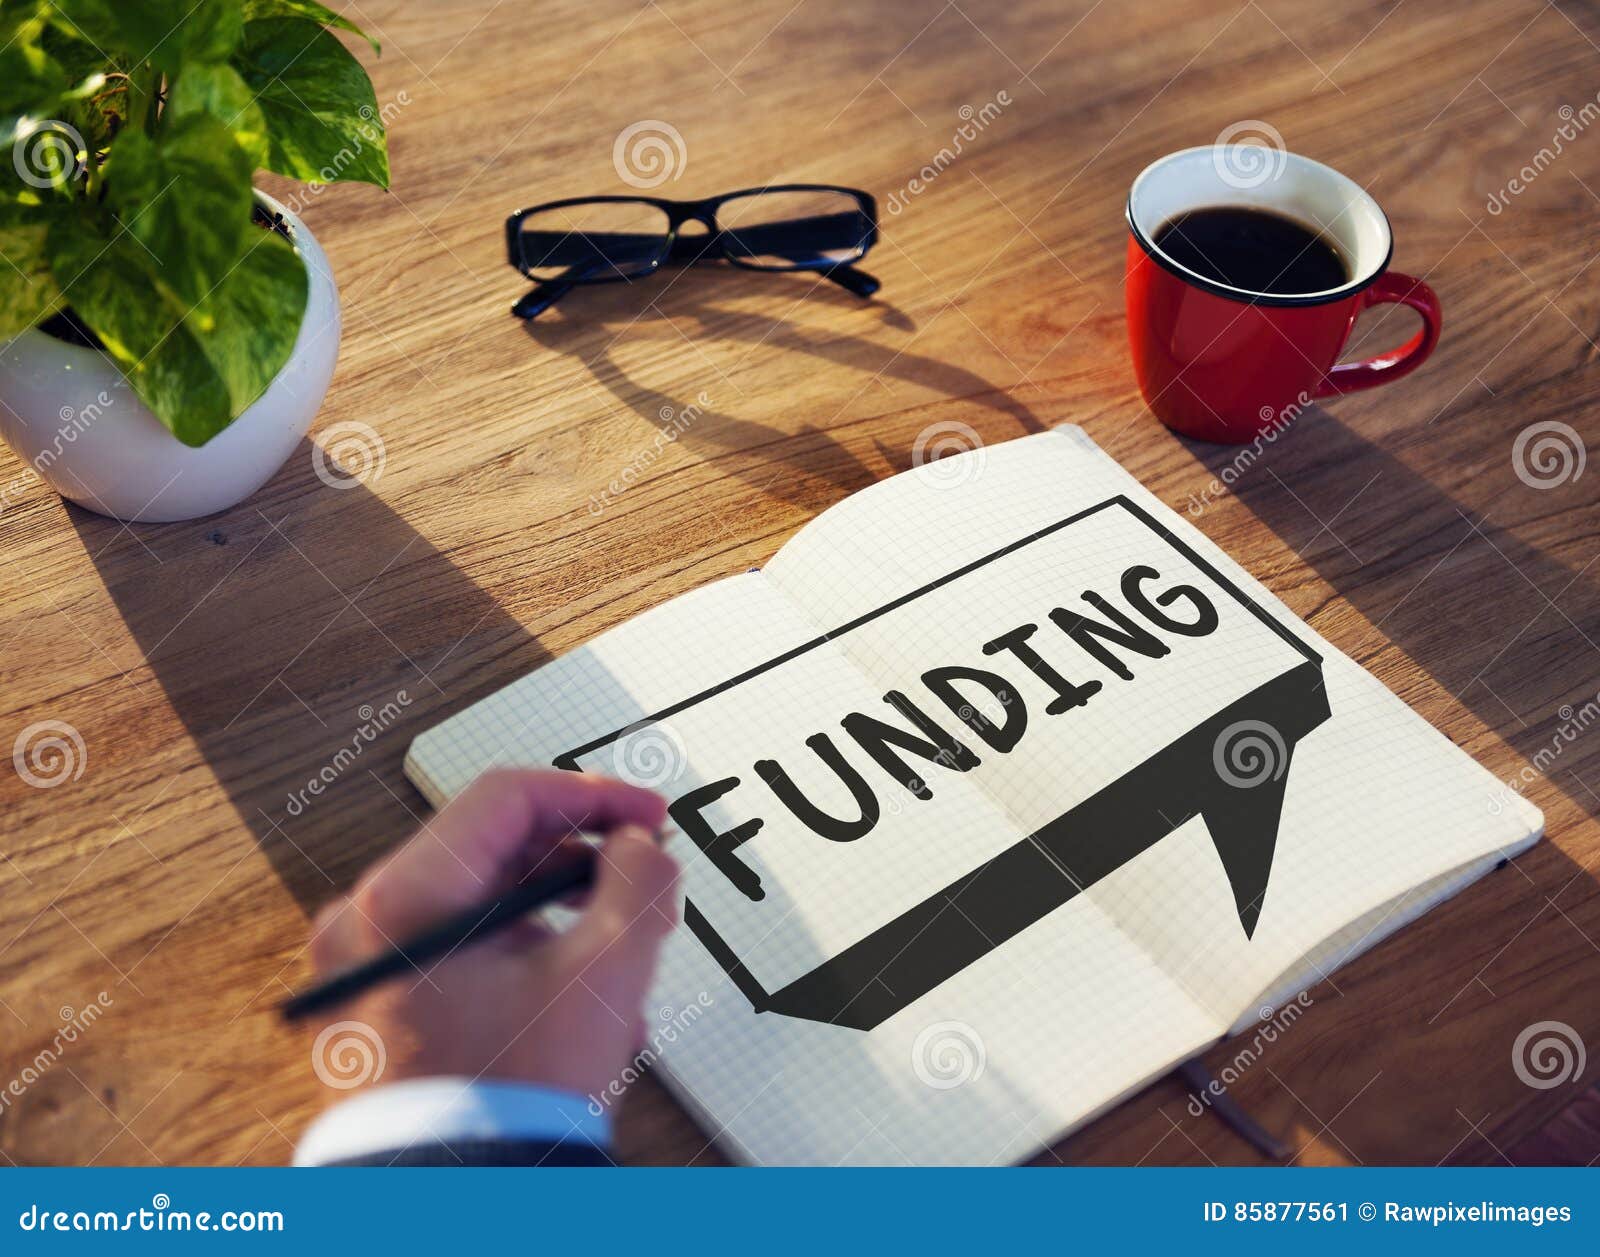 funding donation investment budget capital concept